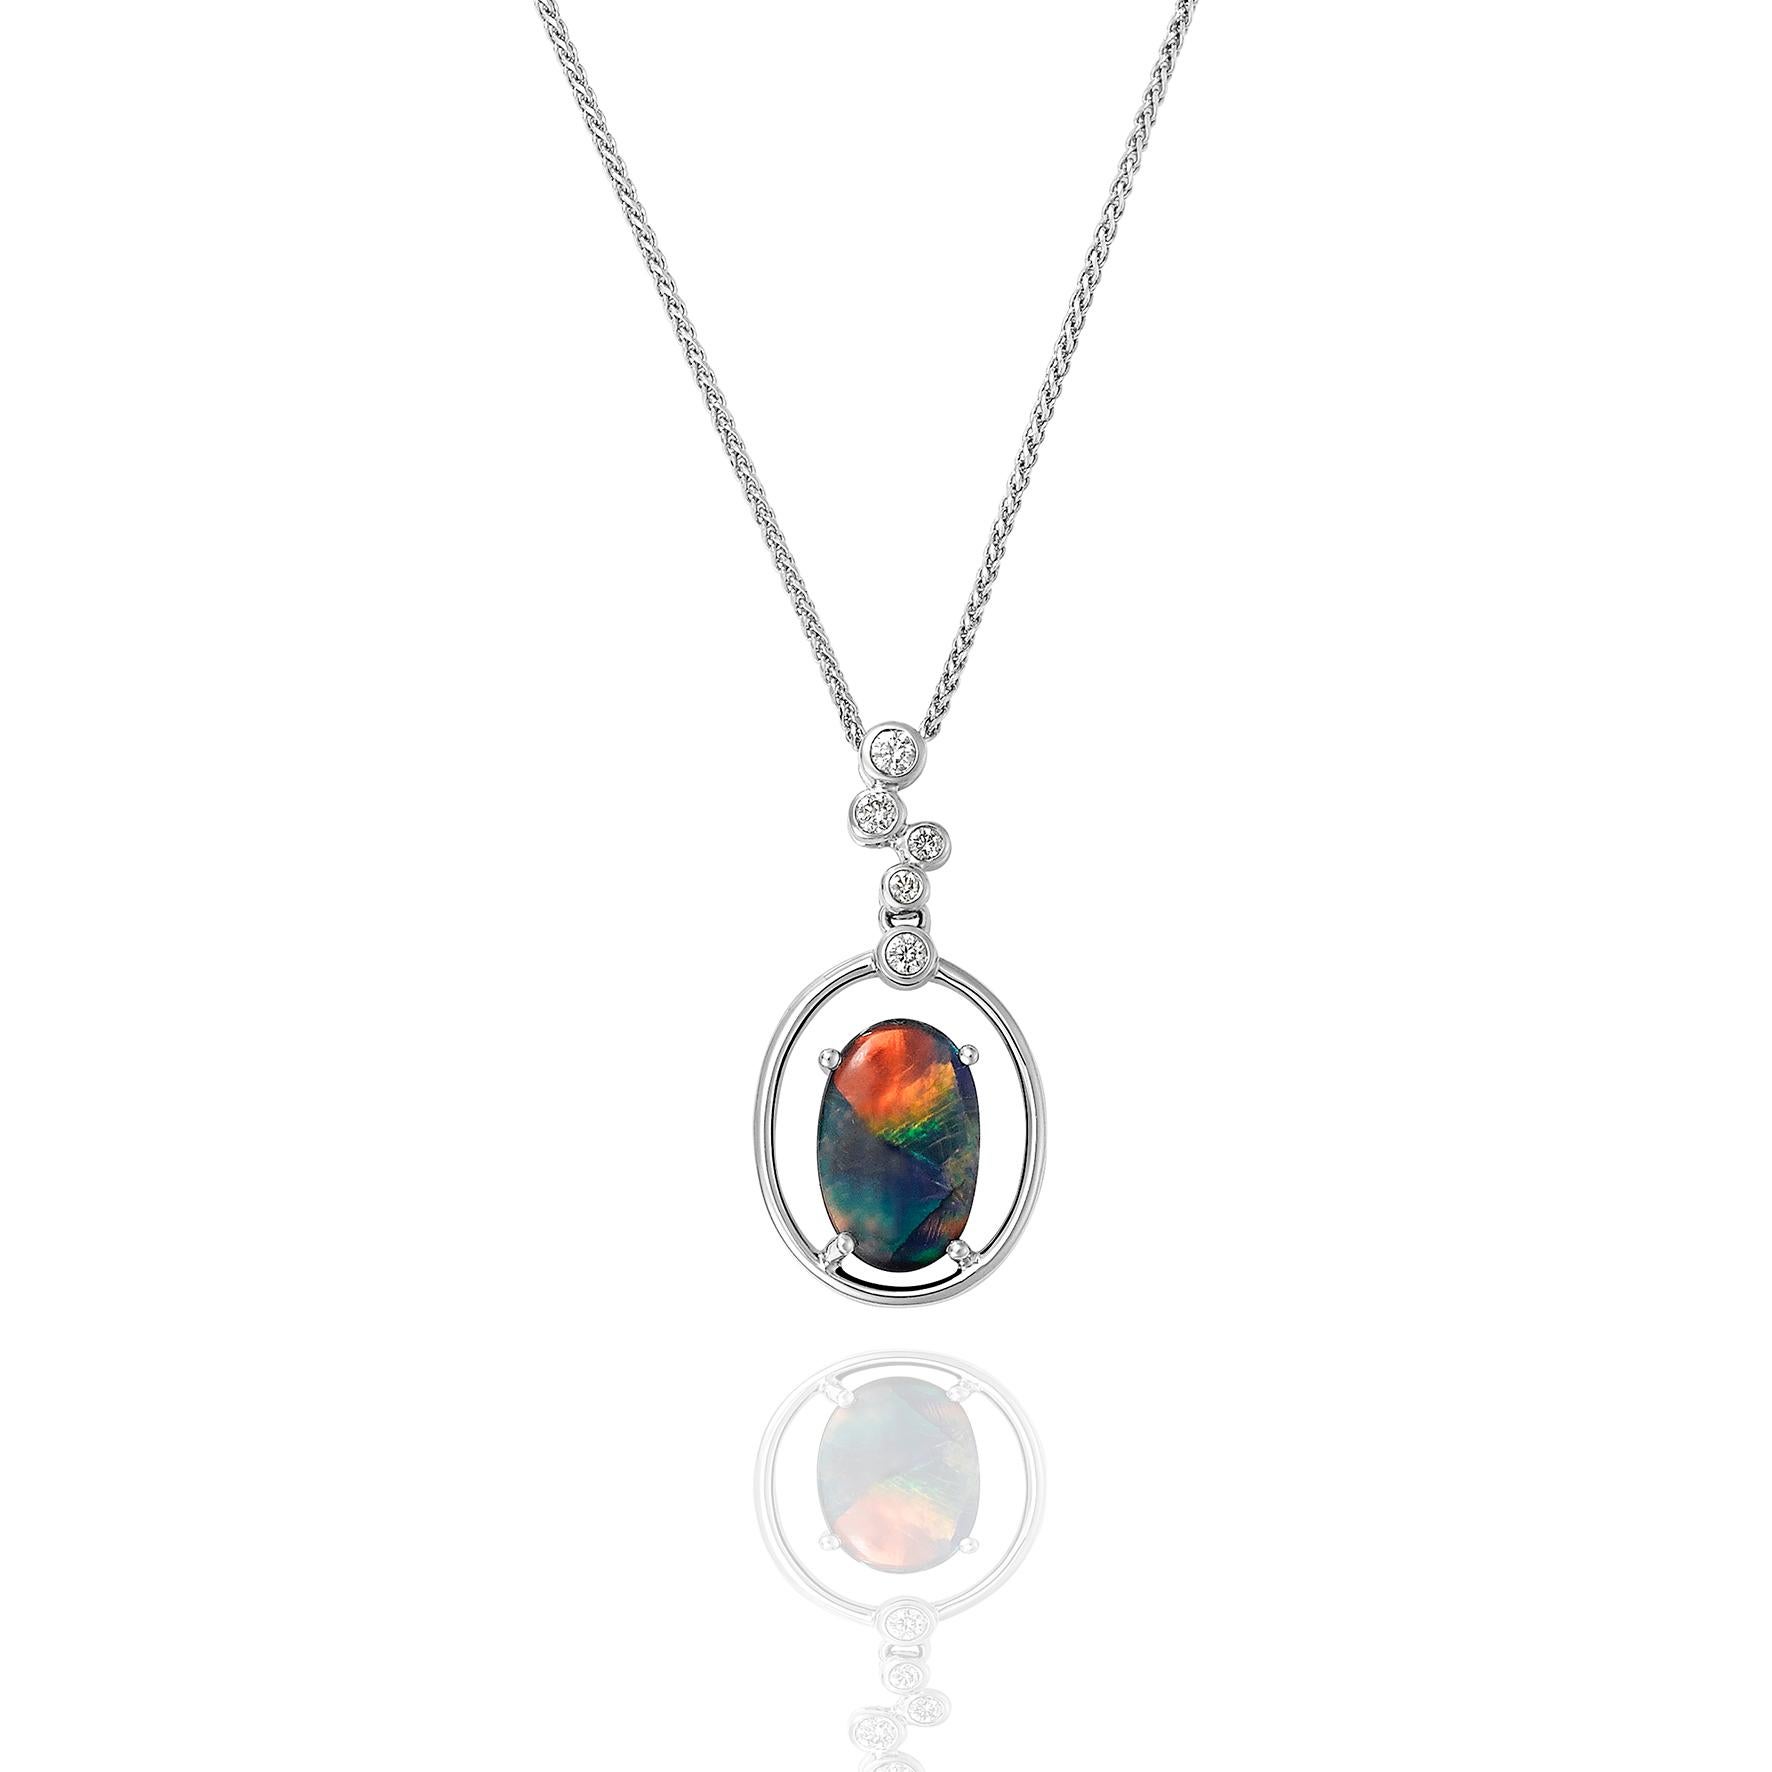 Giulians handcrafted 18 karat white gold Australian Black Opal and Diamond Pendant Necklace.  This pendant features a 1.78ct natural, solid black opal from Lightning Ridge, NSW.  The opal is set in 4 prongs within a  18 karat white gold framework.